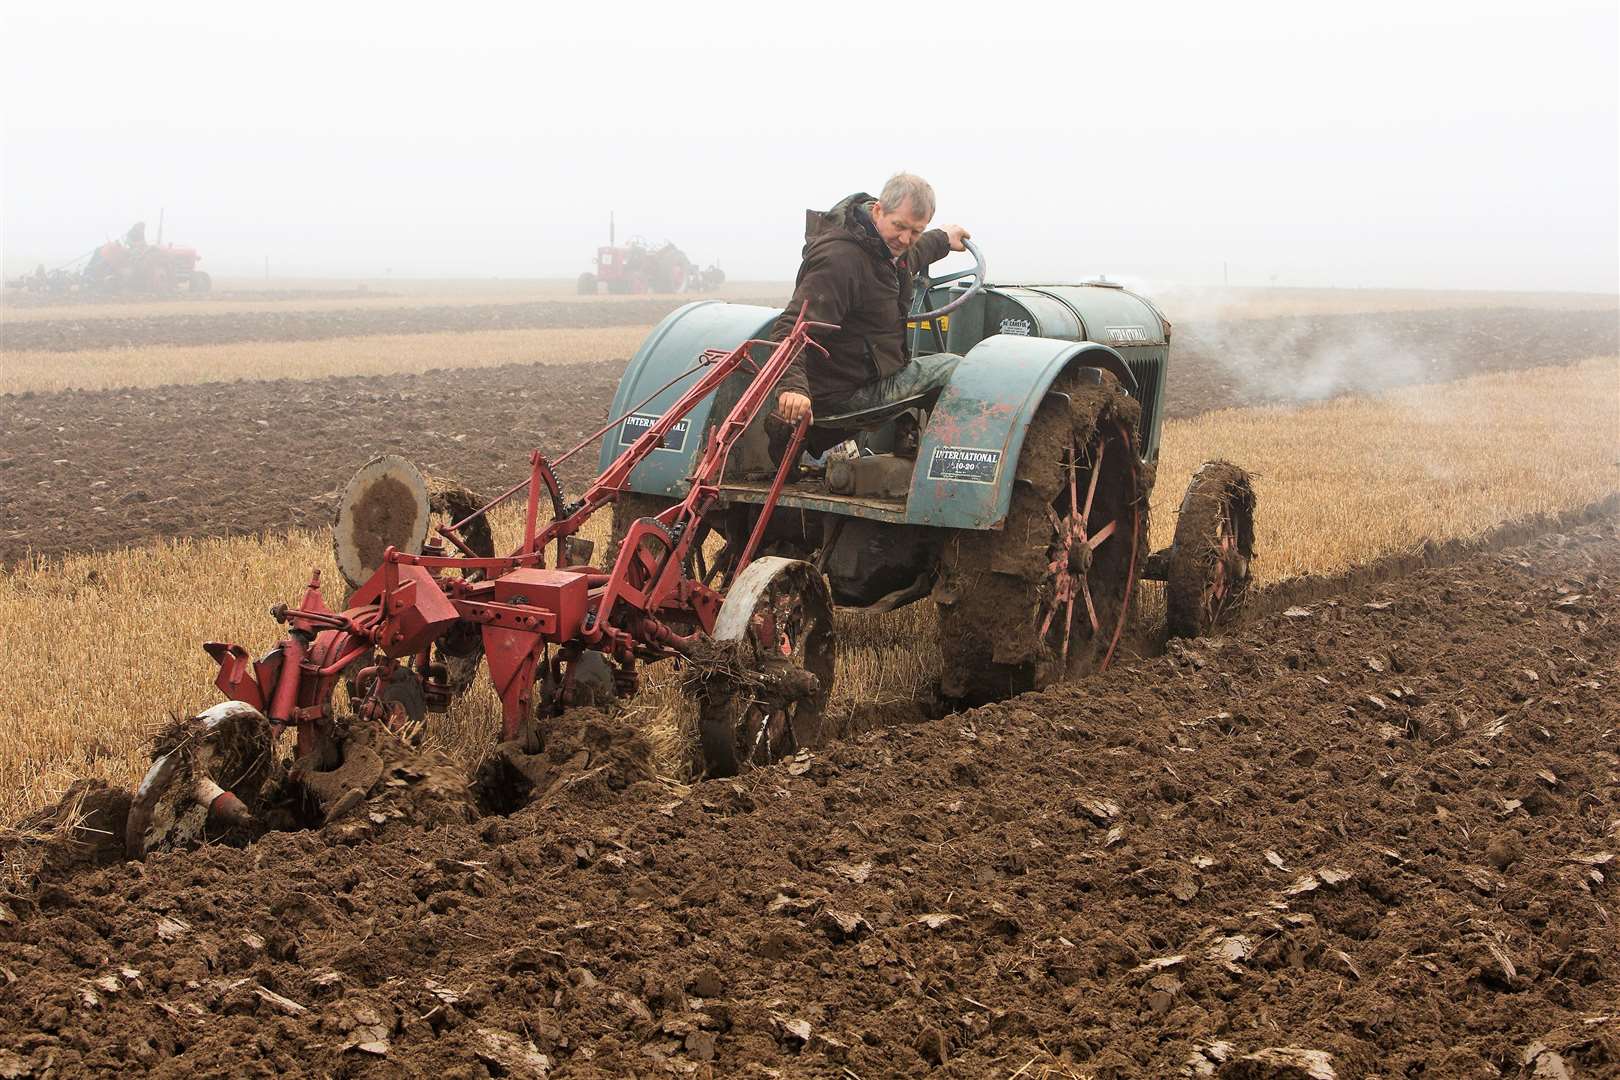 Michael Mackay, West Greenland, with his International tractor and plough combination, in the vintage trailing section. Michael was a winner at the event. Photo: Robert MacDonald/Northern Studios